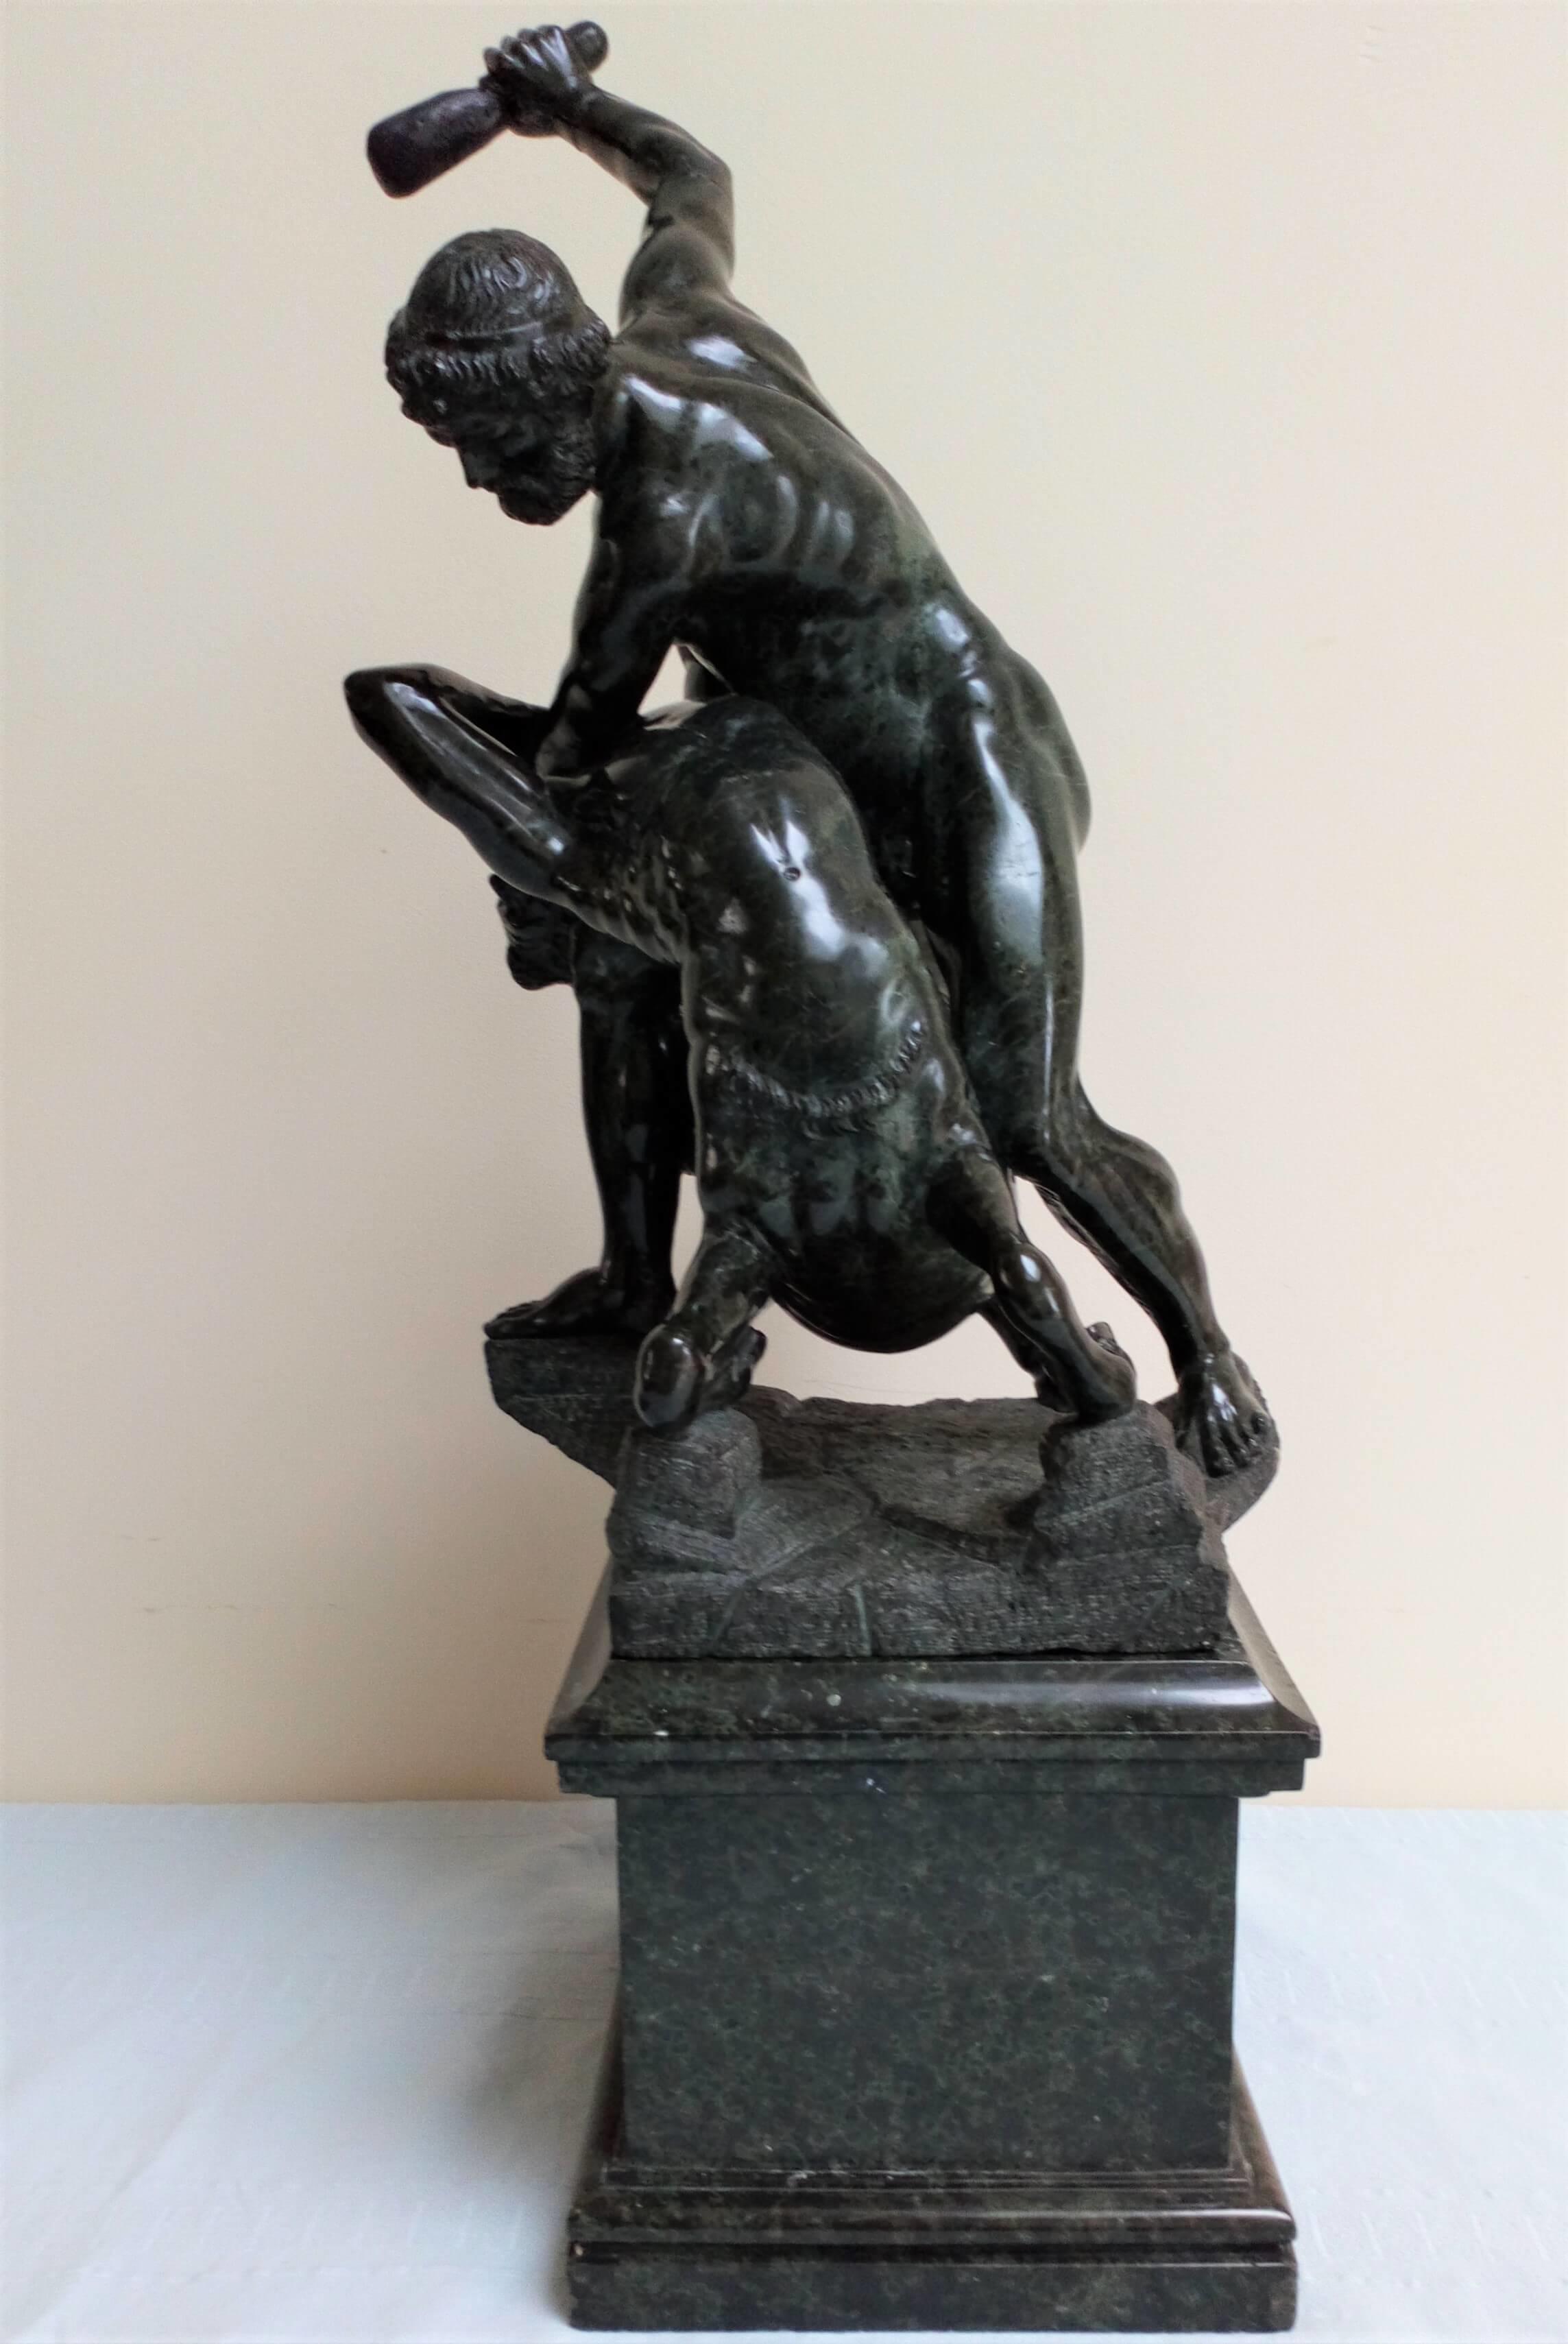 Antique 19th C Grand Tour serpentine sculpture depicting Hercules and Nessus the Centaur after the original by Giambologna 63cm